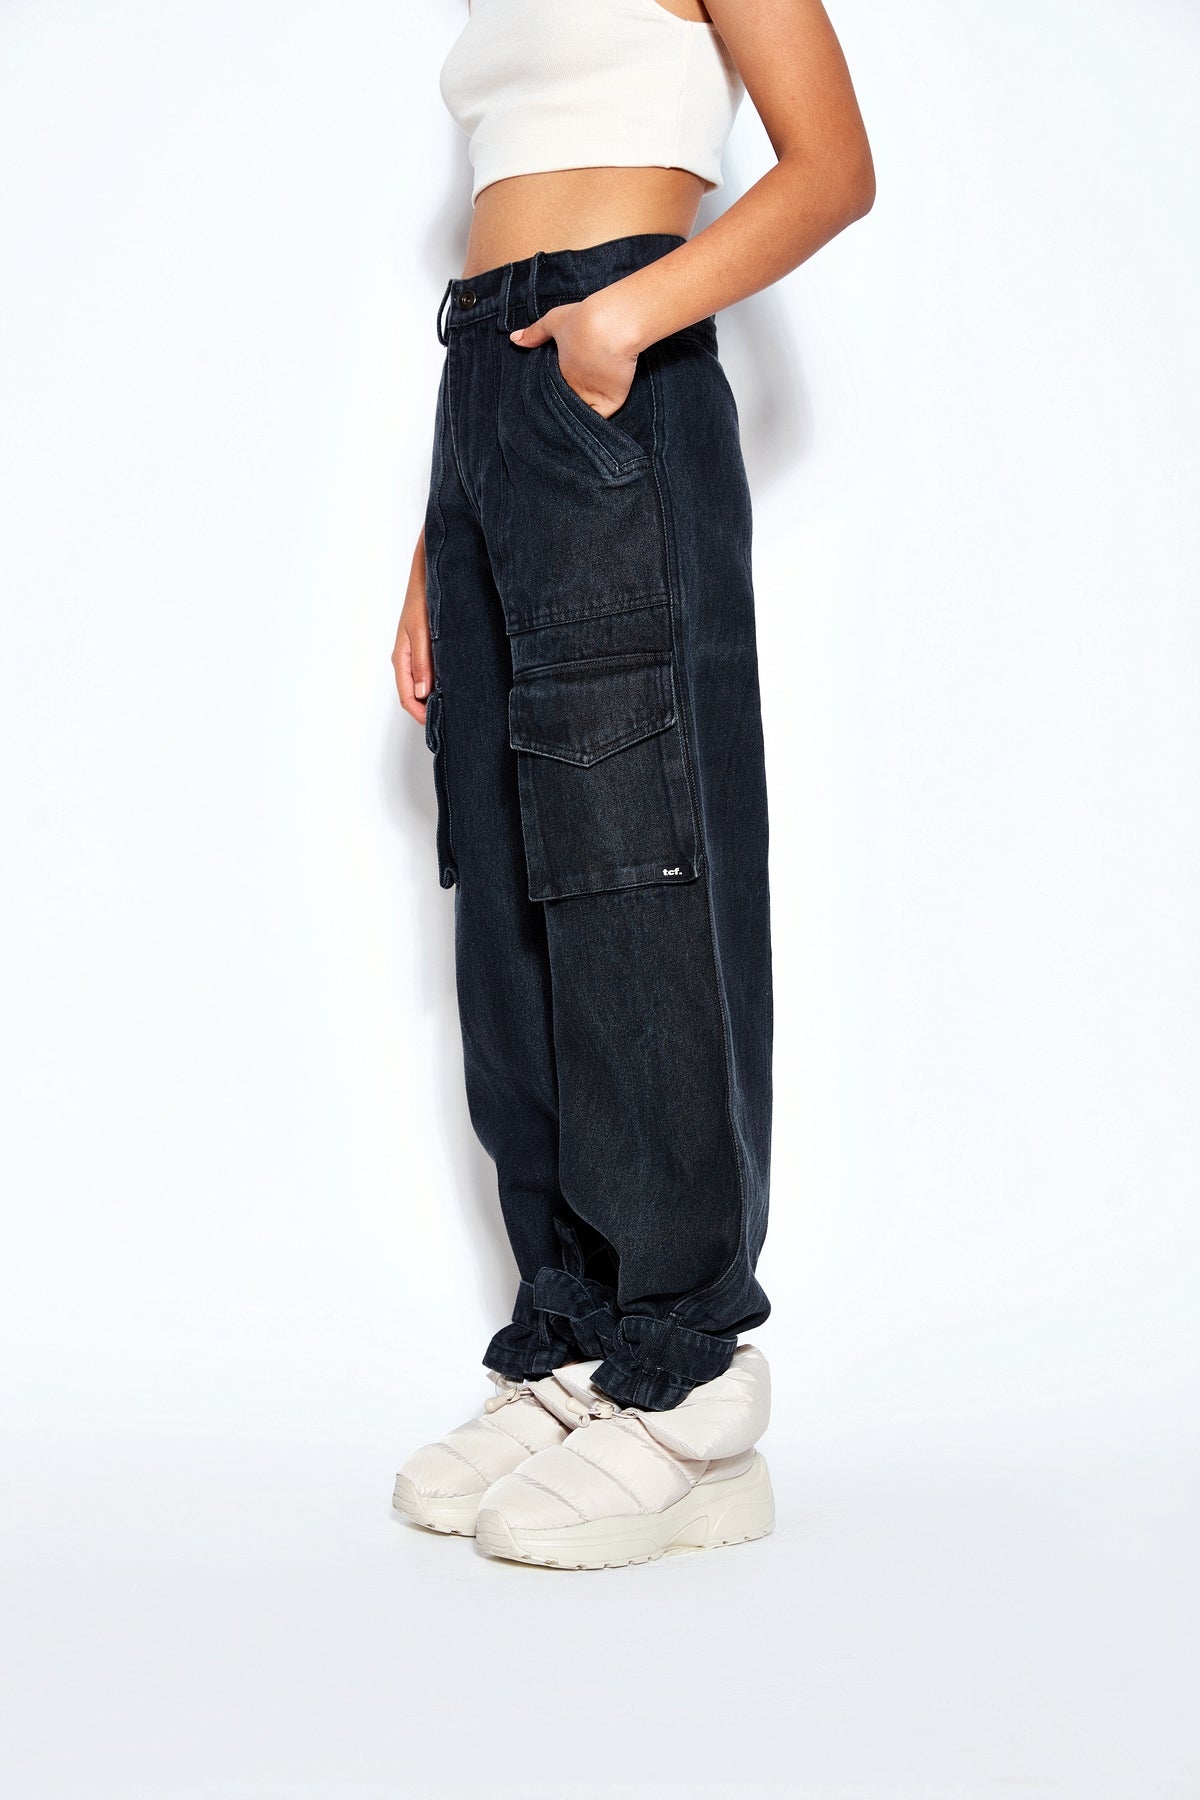 Bronx Night Black Baggy Jeans by BSAT